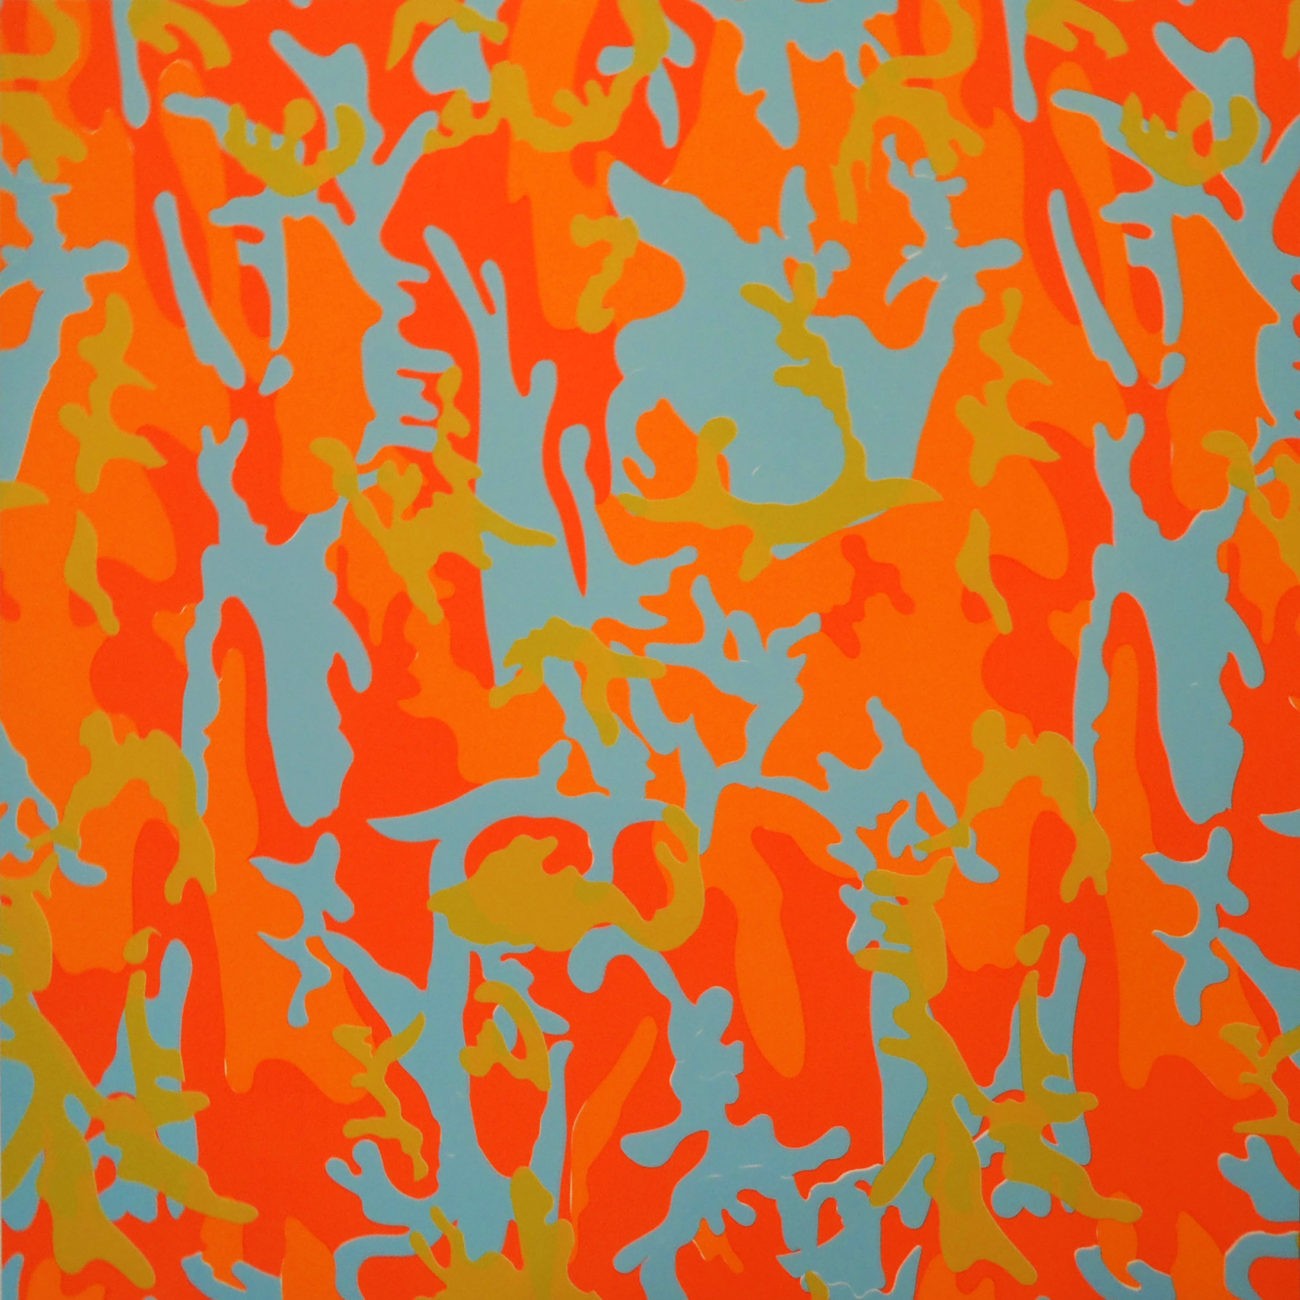 Andy Warhol | Camouflage 413 | 1987 | Image of Artists' work.